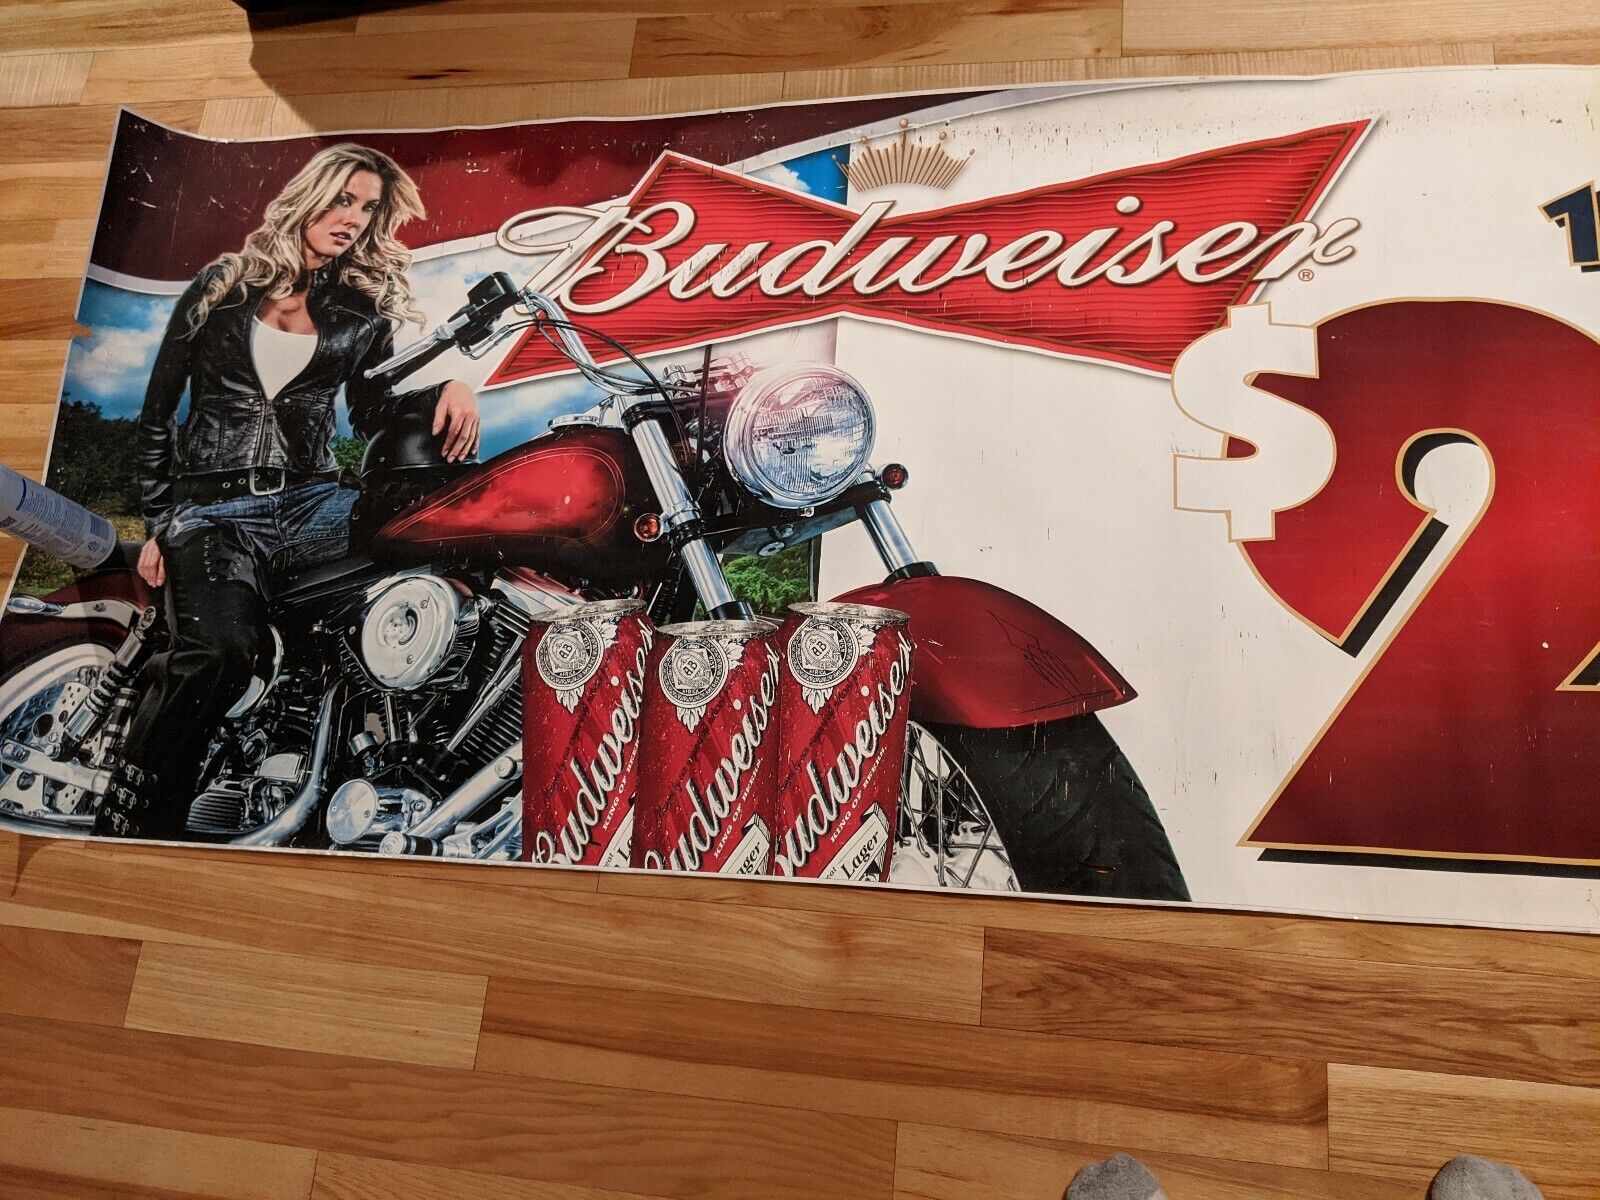  LARGE BUDWEISER BEER 12\' 12FT MOTORCYCLE BAR ADVERTISEMENT POSTER SIGN